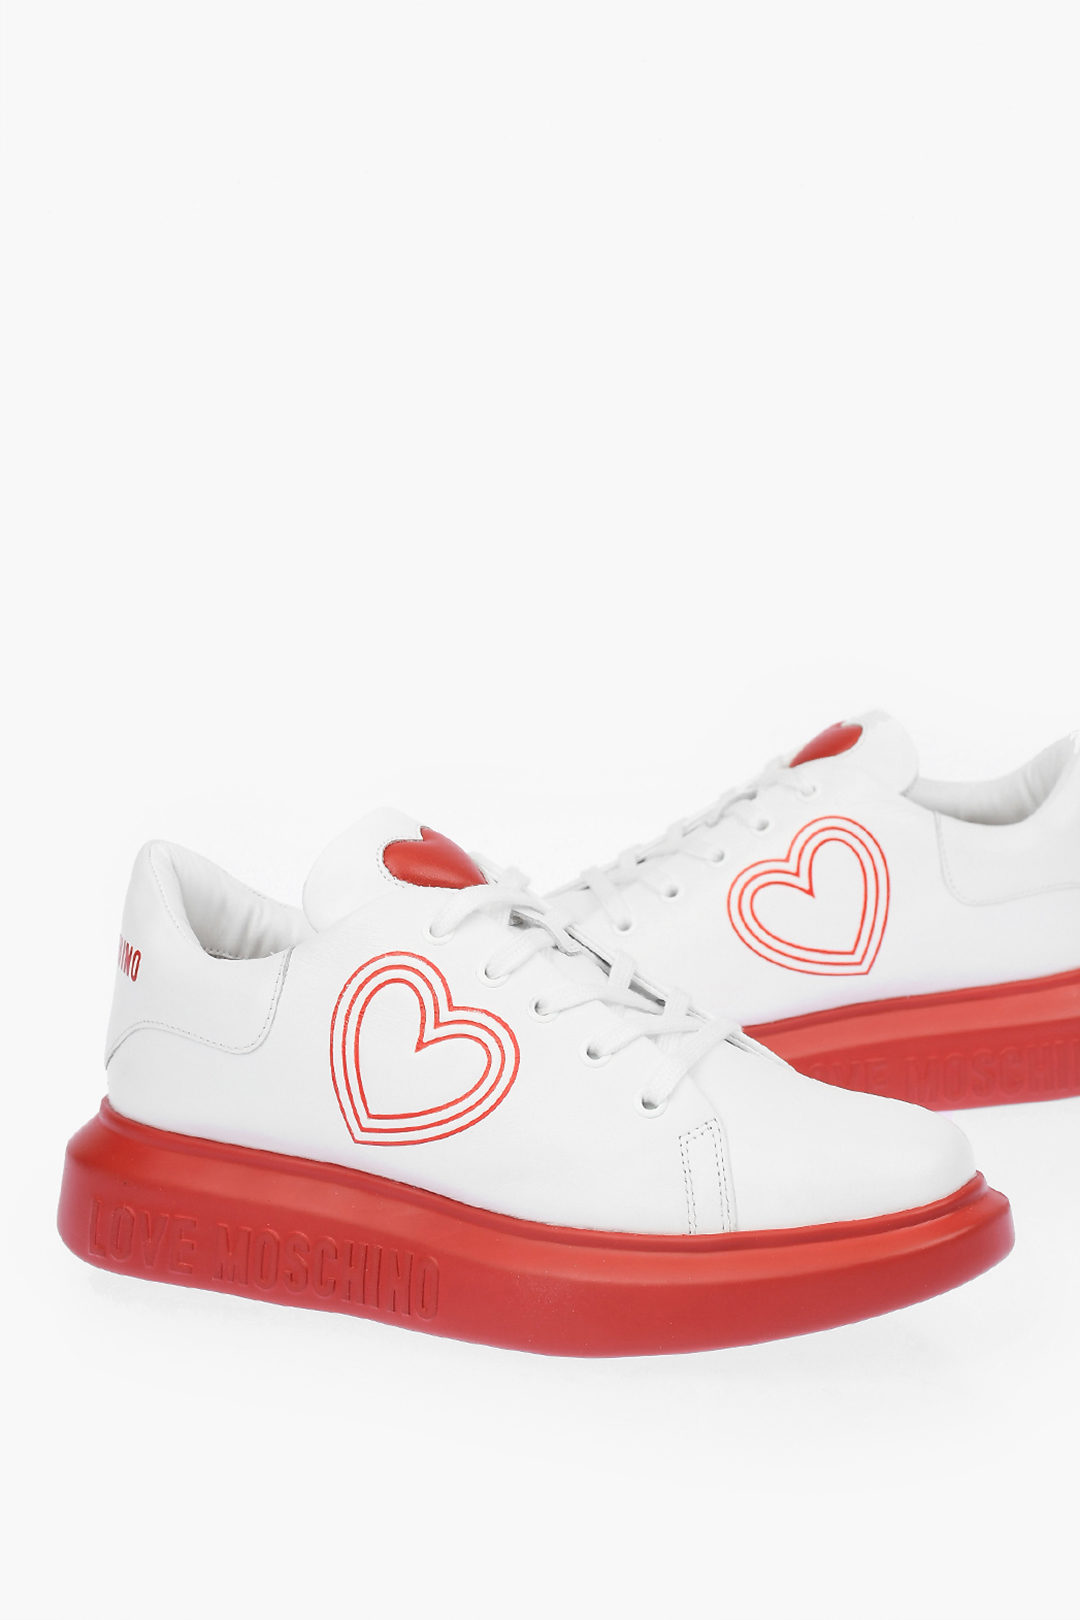 Enzovoorts Bang om te sterven Beschikbaar Moschino LOVE Leather Sneakers GOMMA40 with Logo women - Glamood Outlet